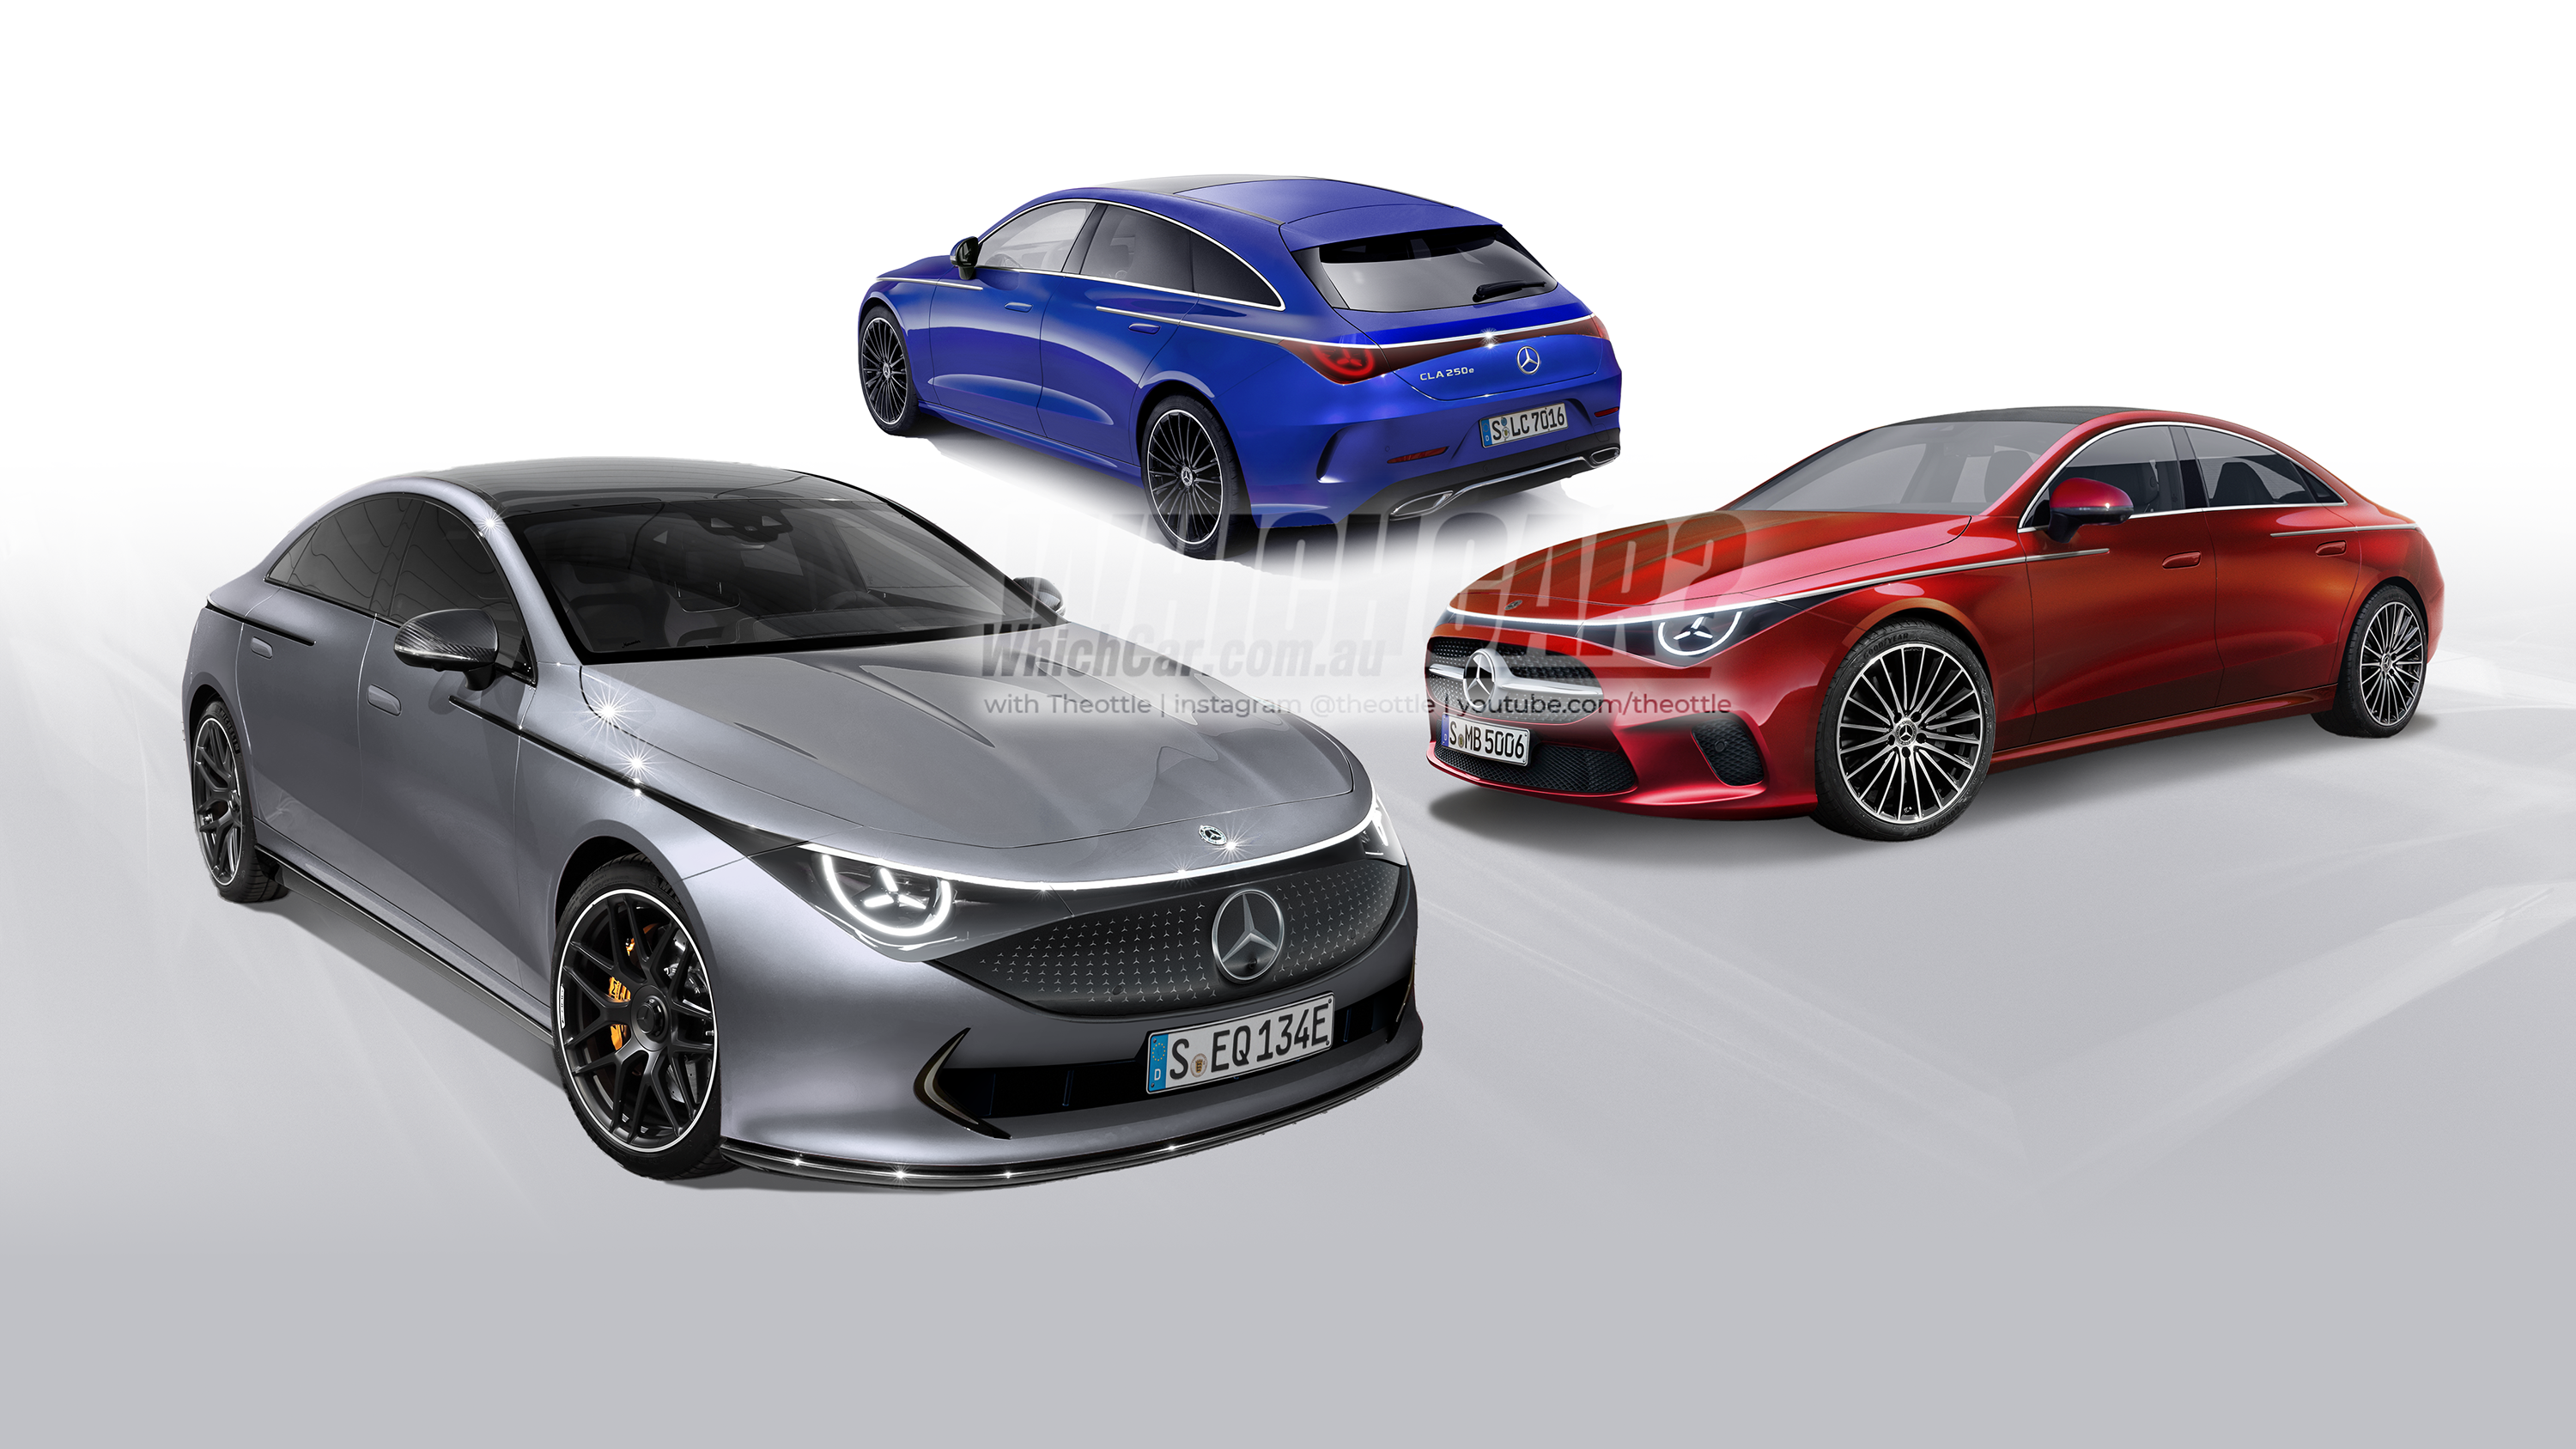 6f4a1ed2/2025 mercedes benz cla rendering whichcar australia theottle png